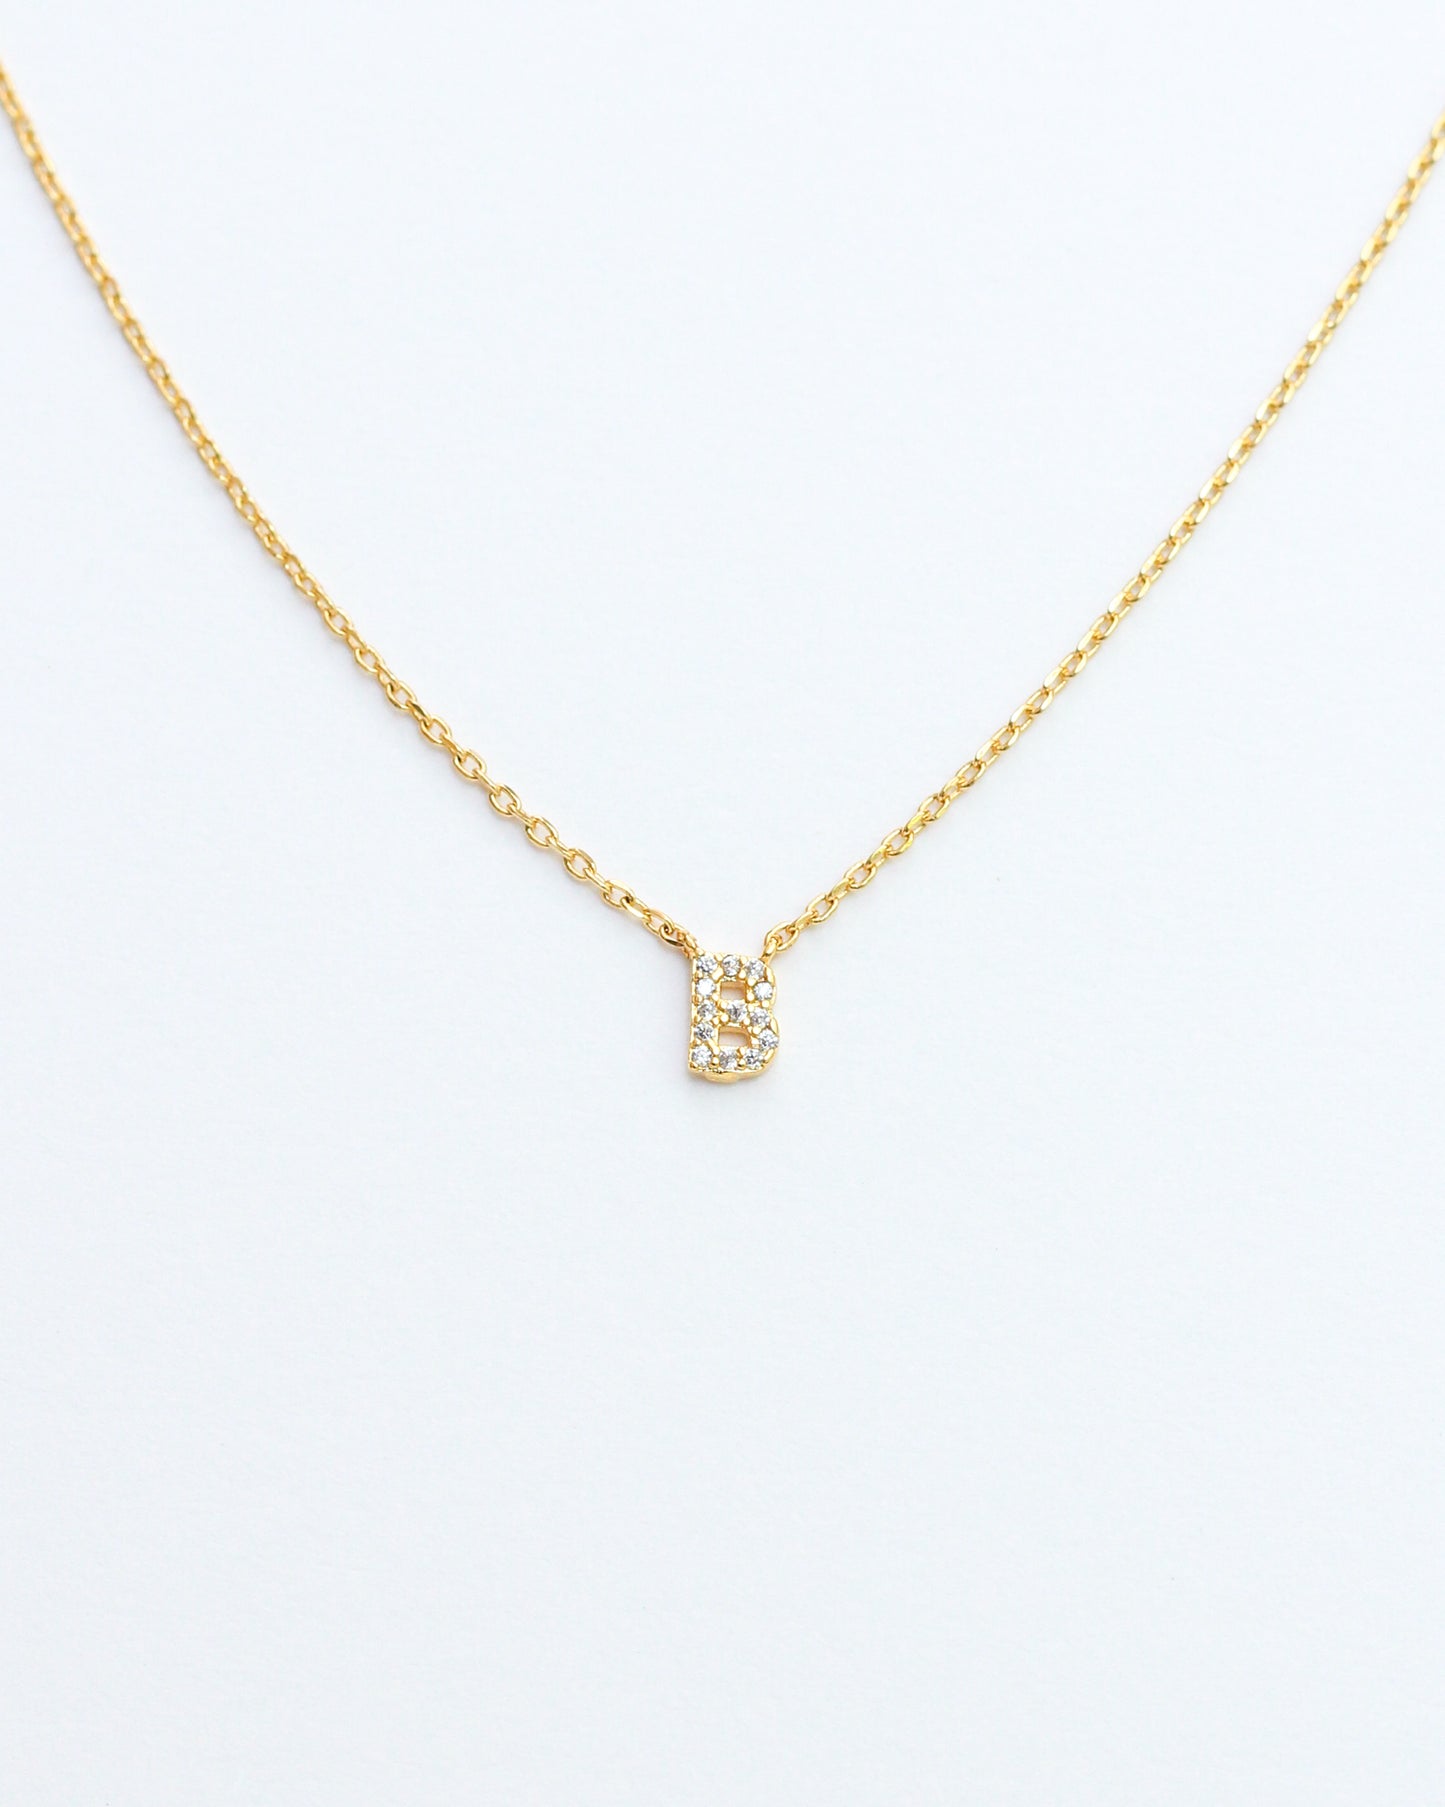 Mini Pave Initial Necklace - Letter B.